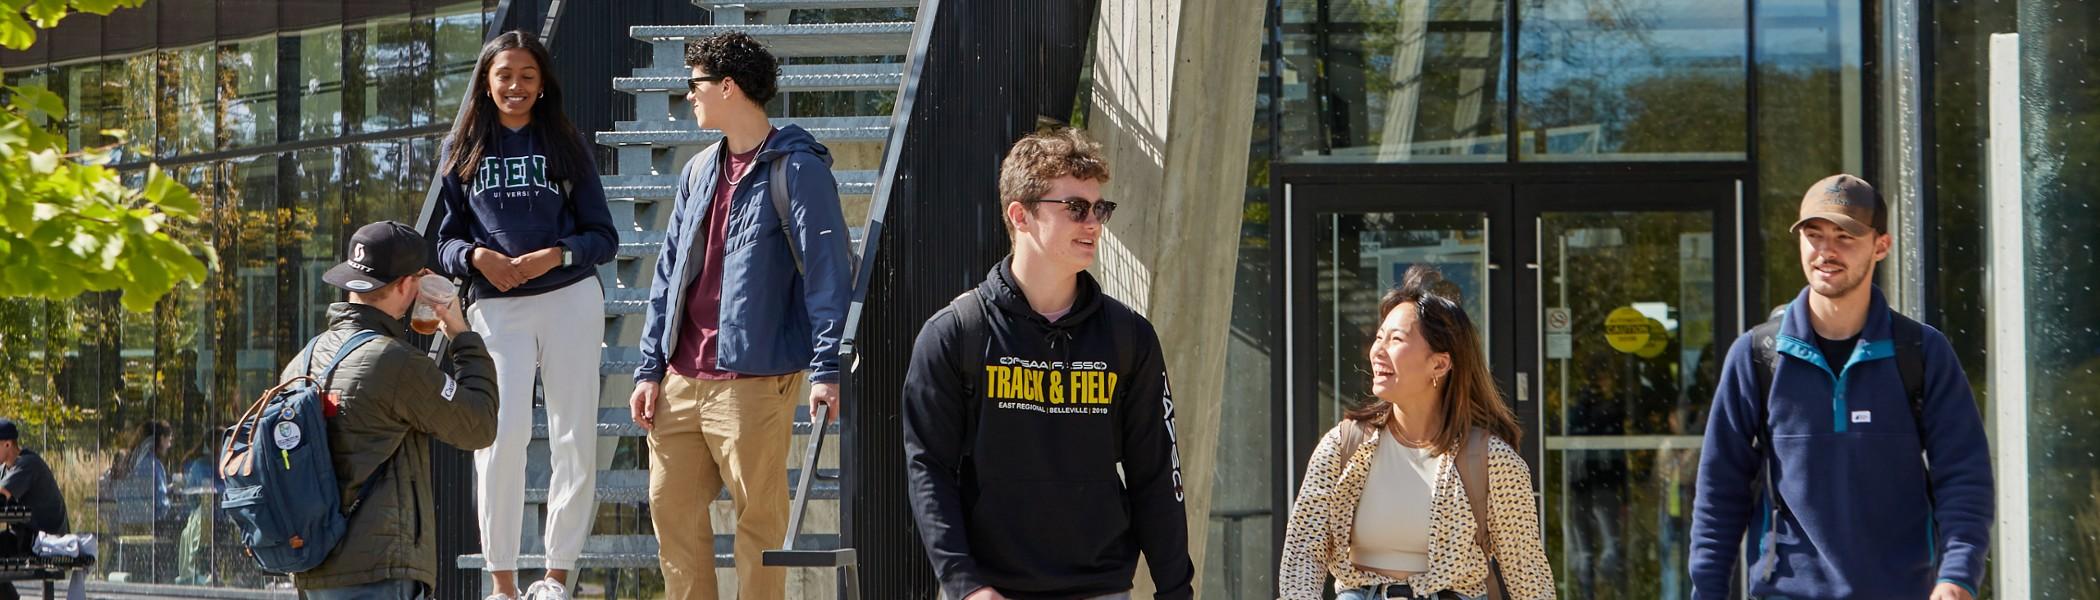 A group of students walking on the Trent campus